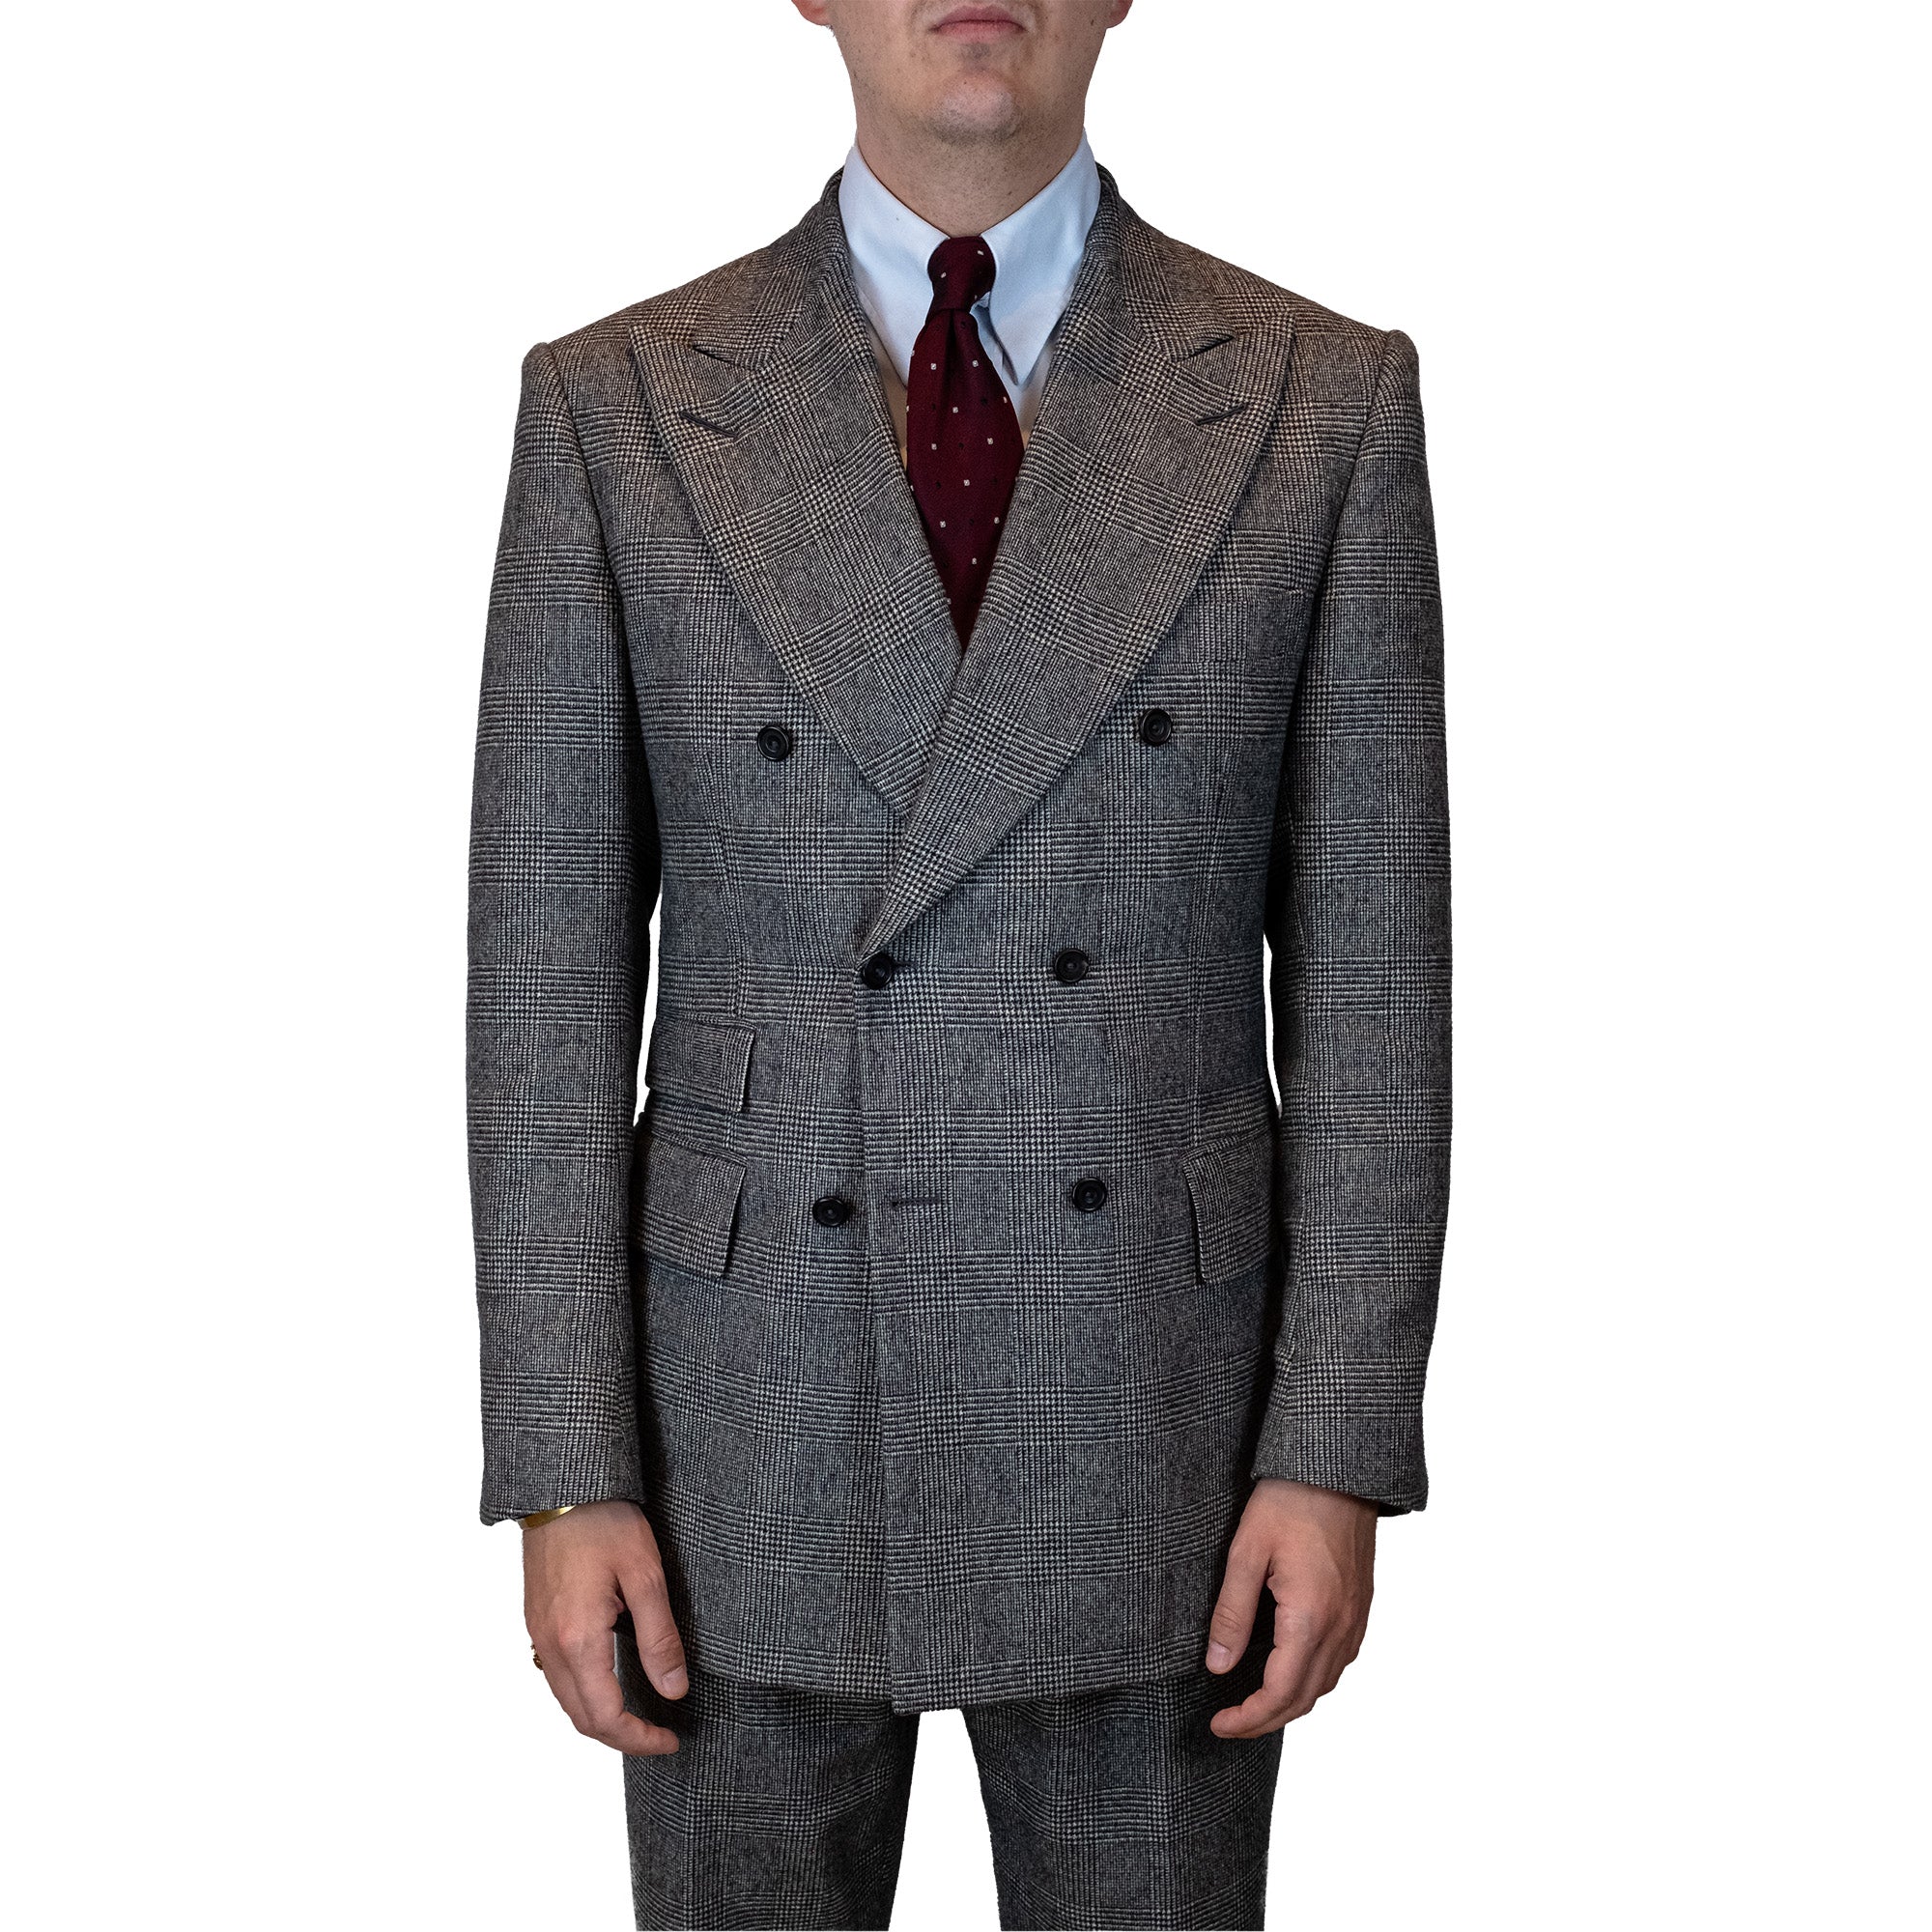 Suit - Black-on-grey Glencheck by Fox Brothers